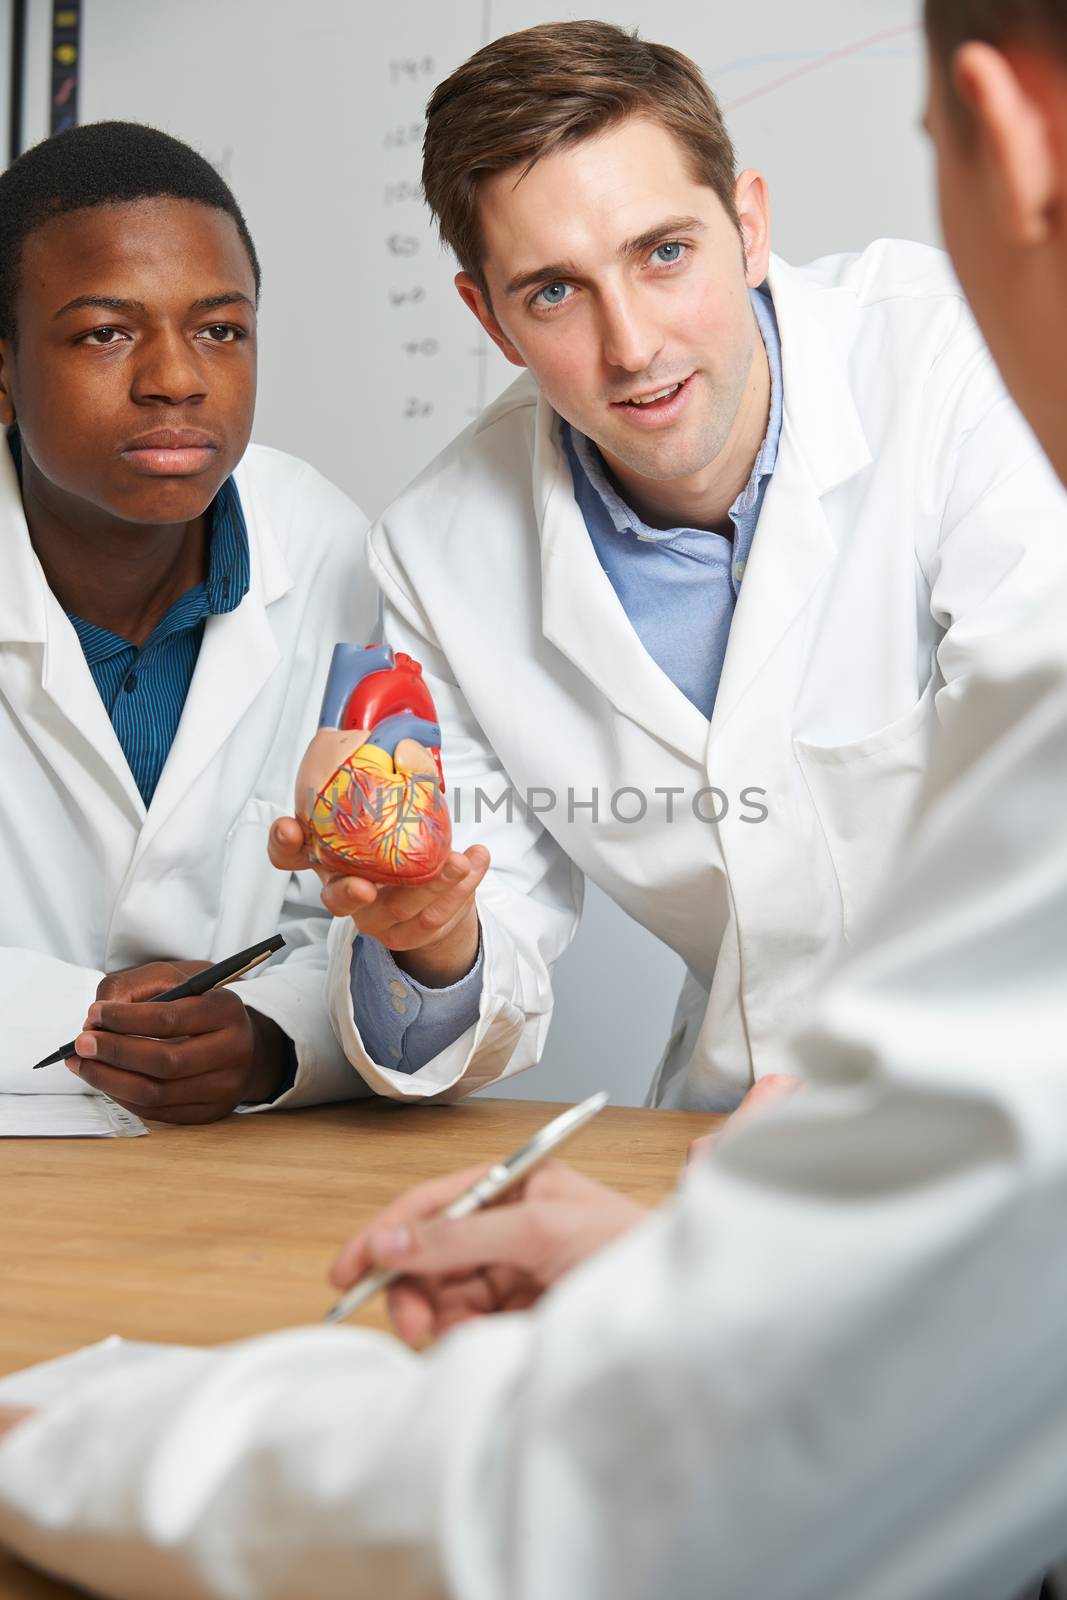 Teacher With Model Heart In Biology Lesson by HWS